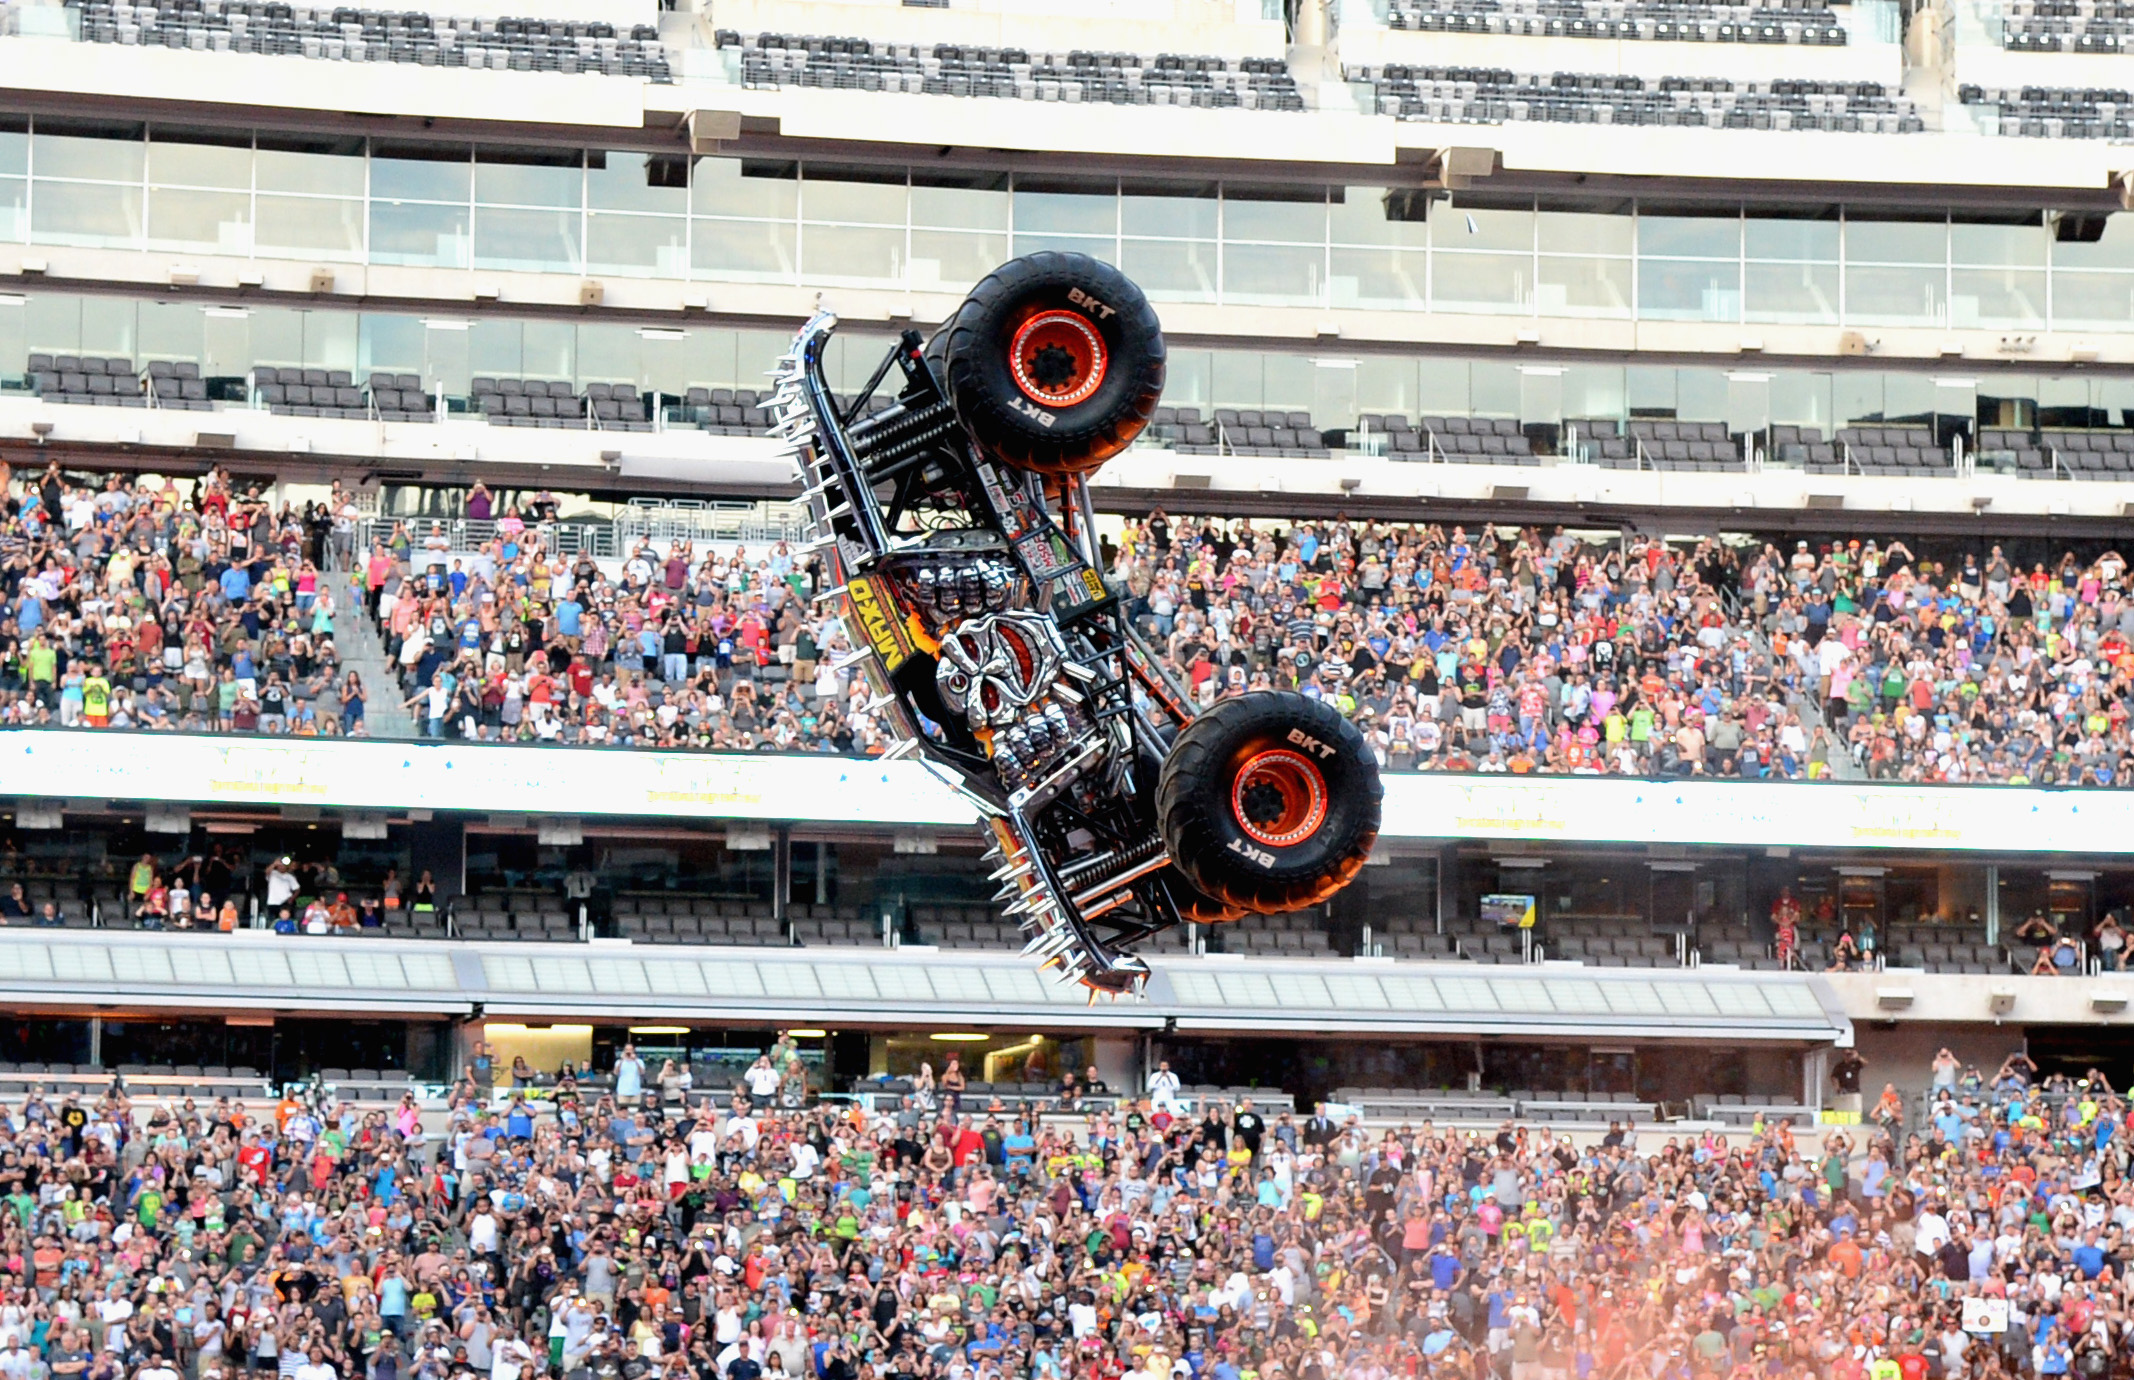 Monster Jam ticket info and truck locations